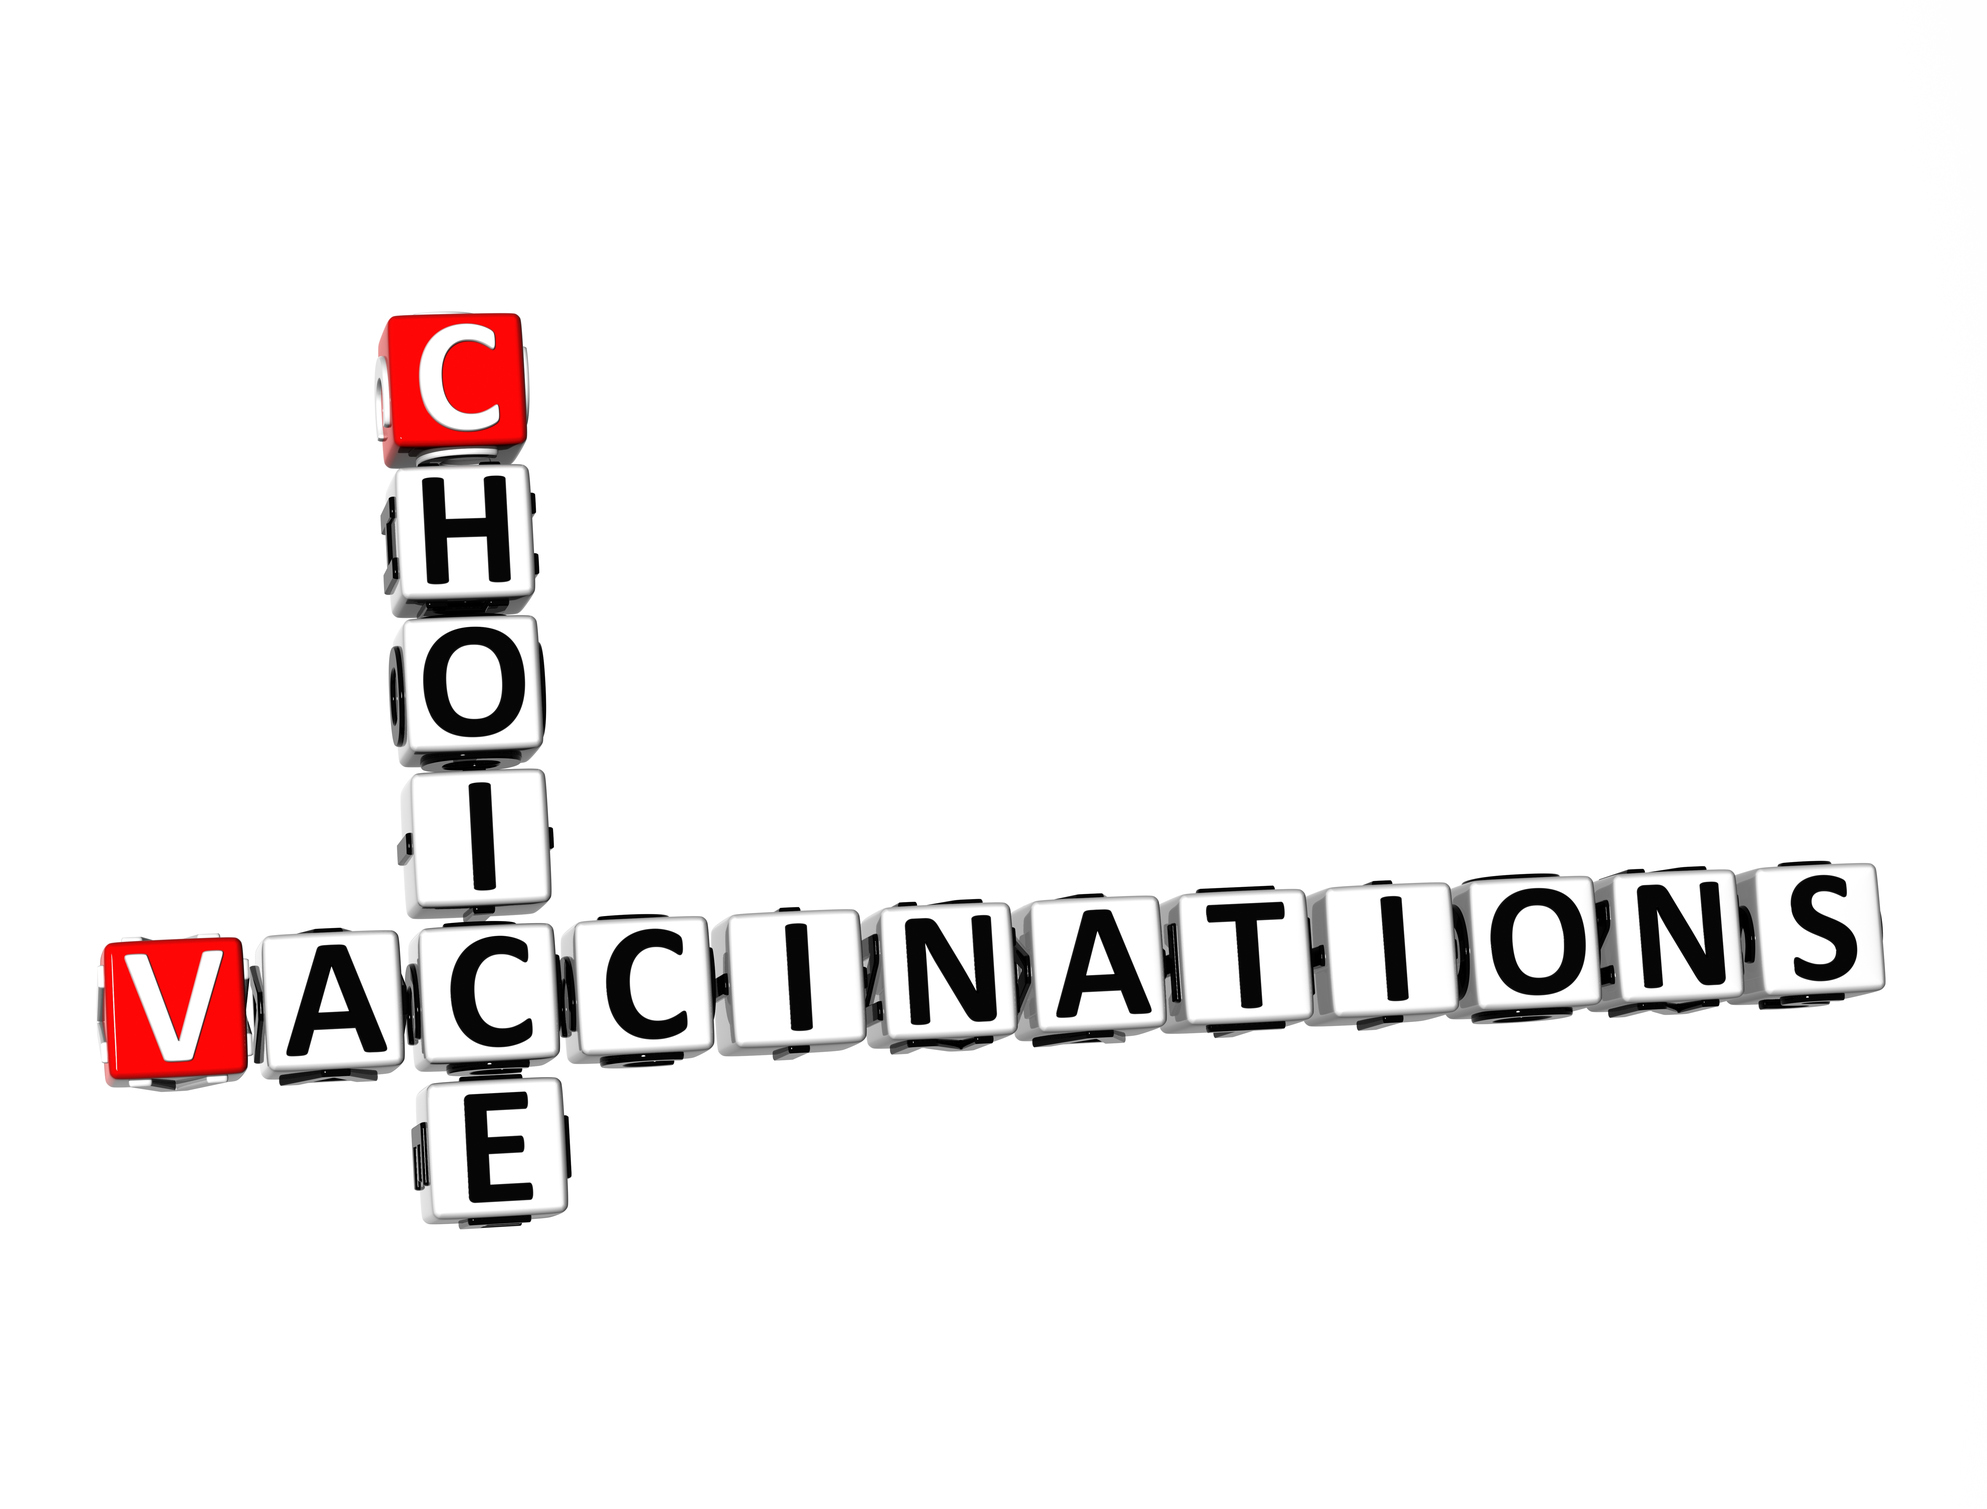 Vaccination choices